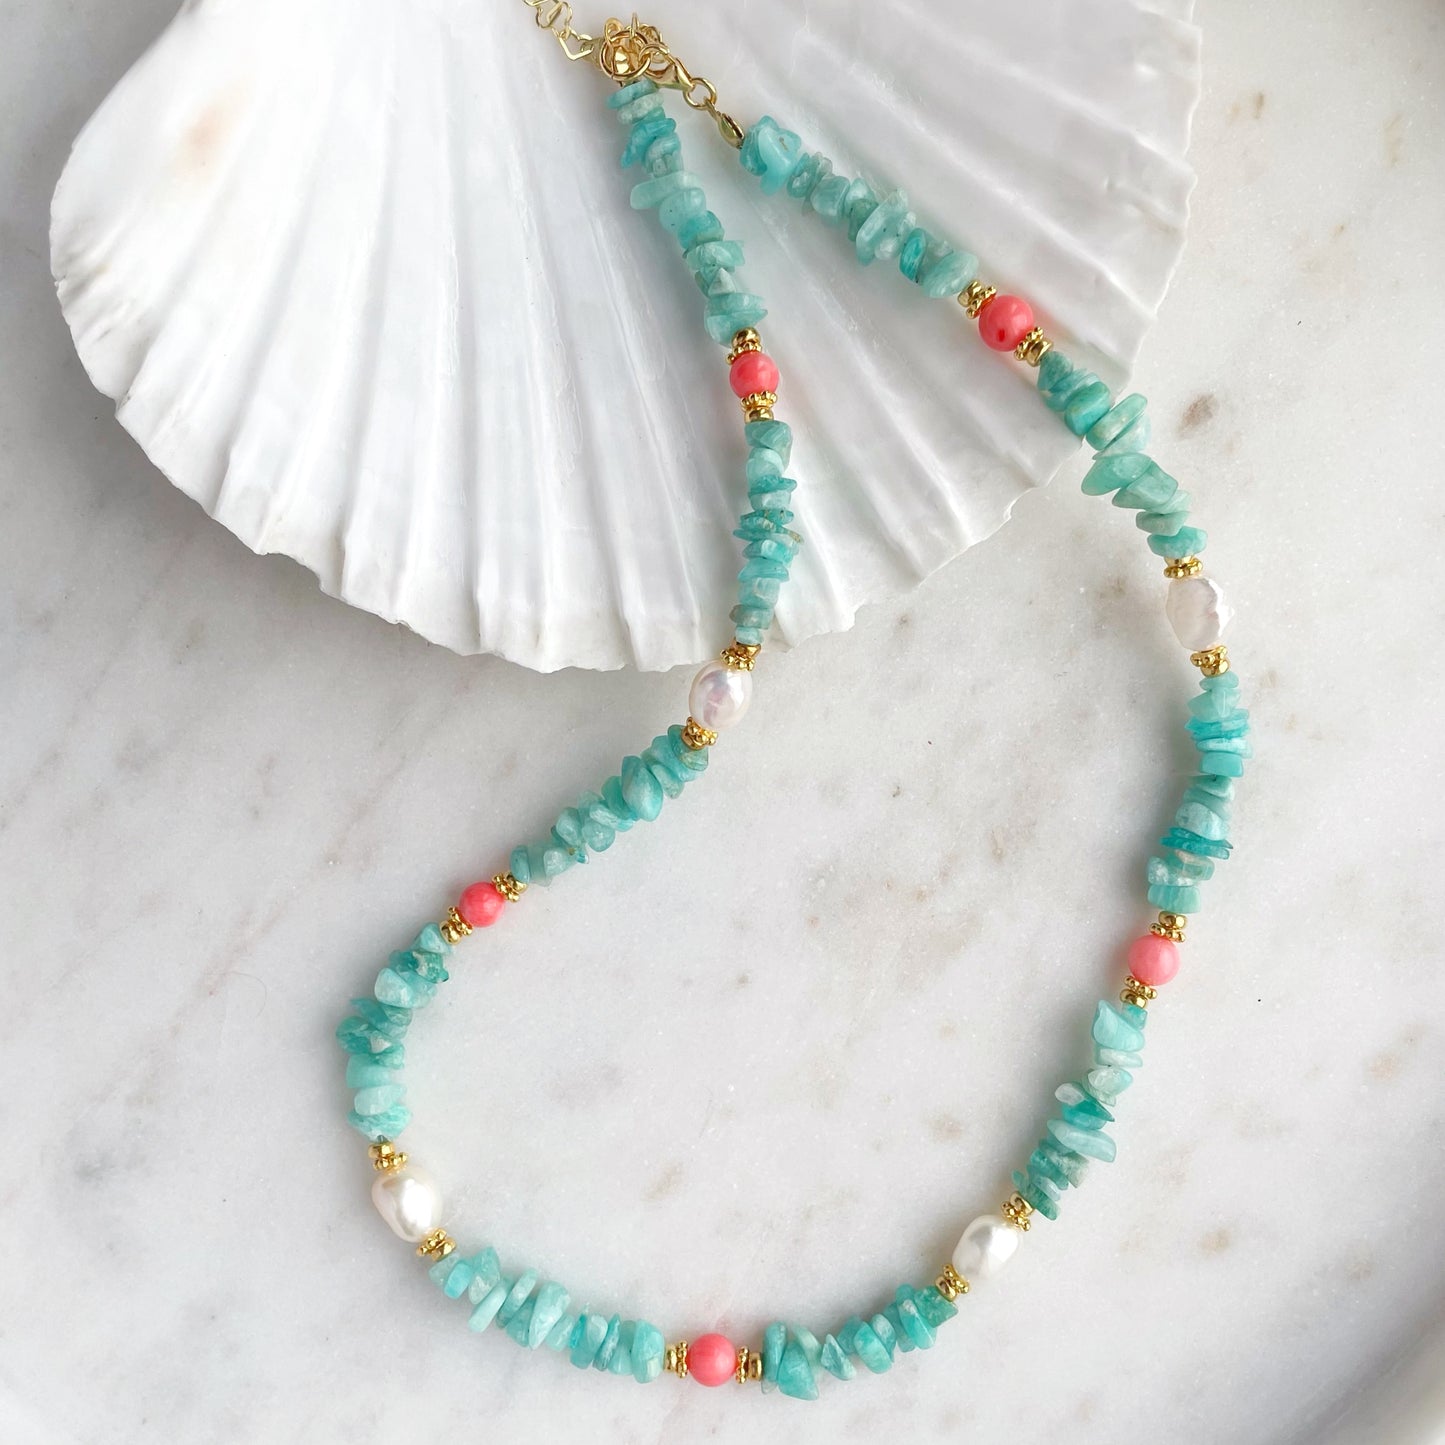 Tropical necklace